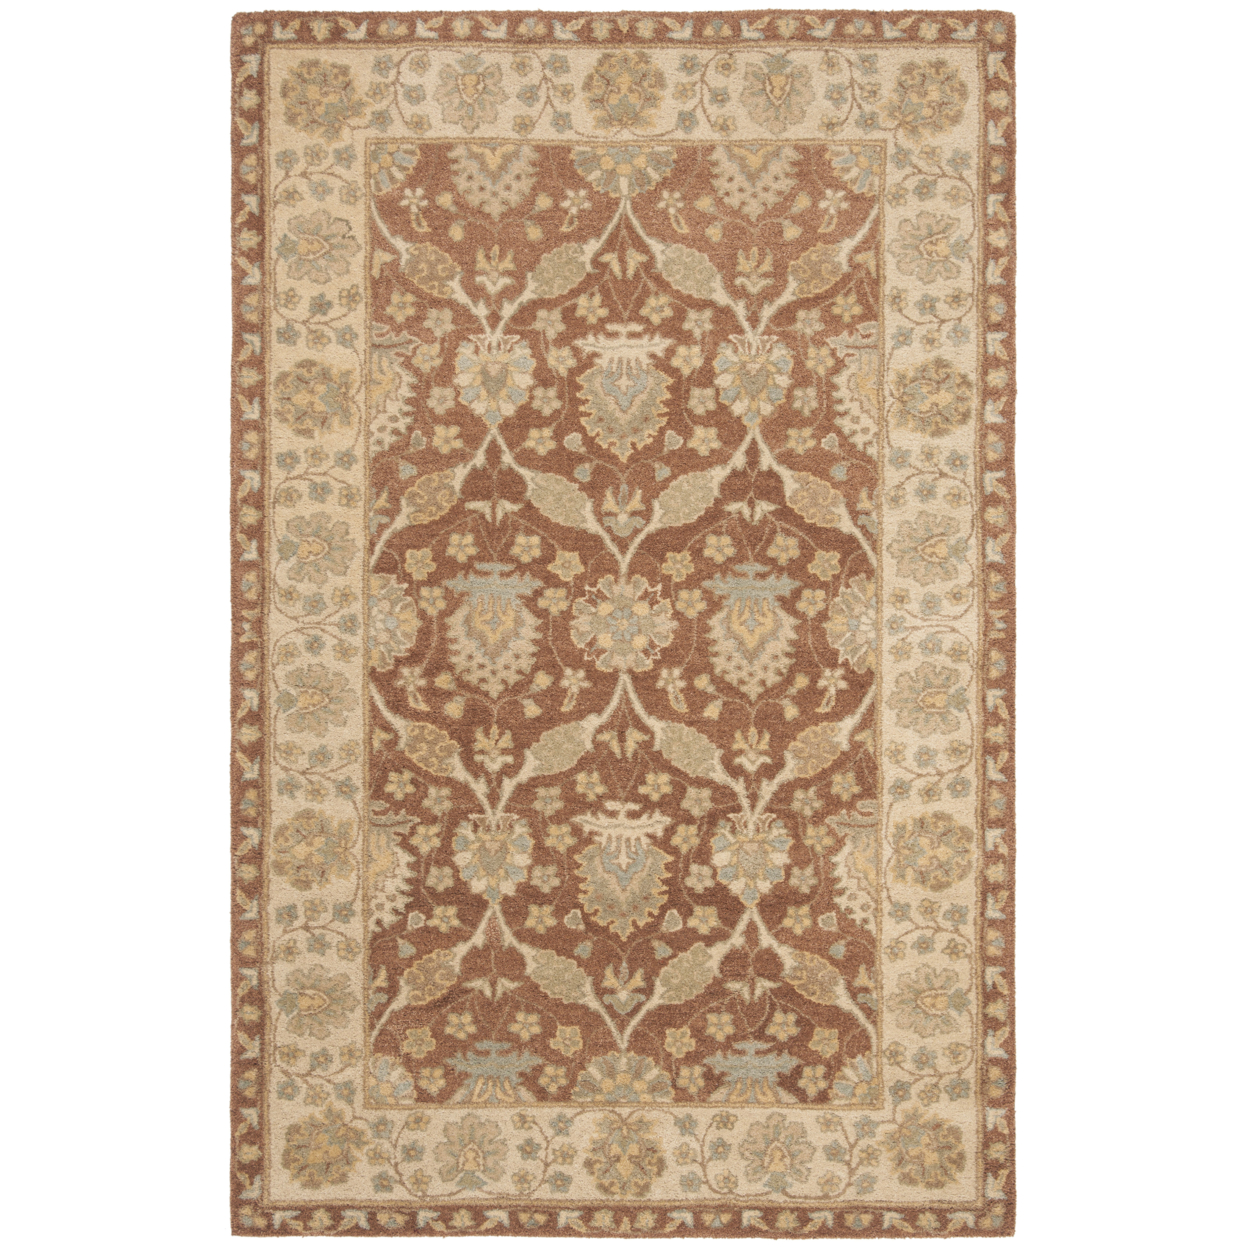 SAFAVIEH Antiquity AT315A Handmade Brown / Taupe Rug - 5' X 8'